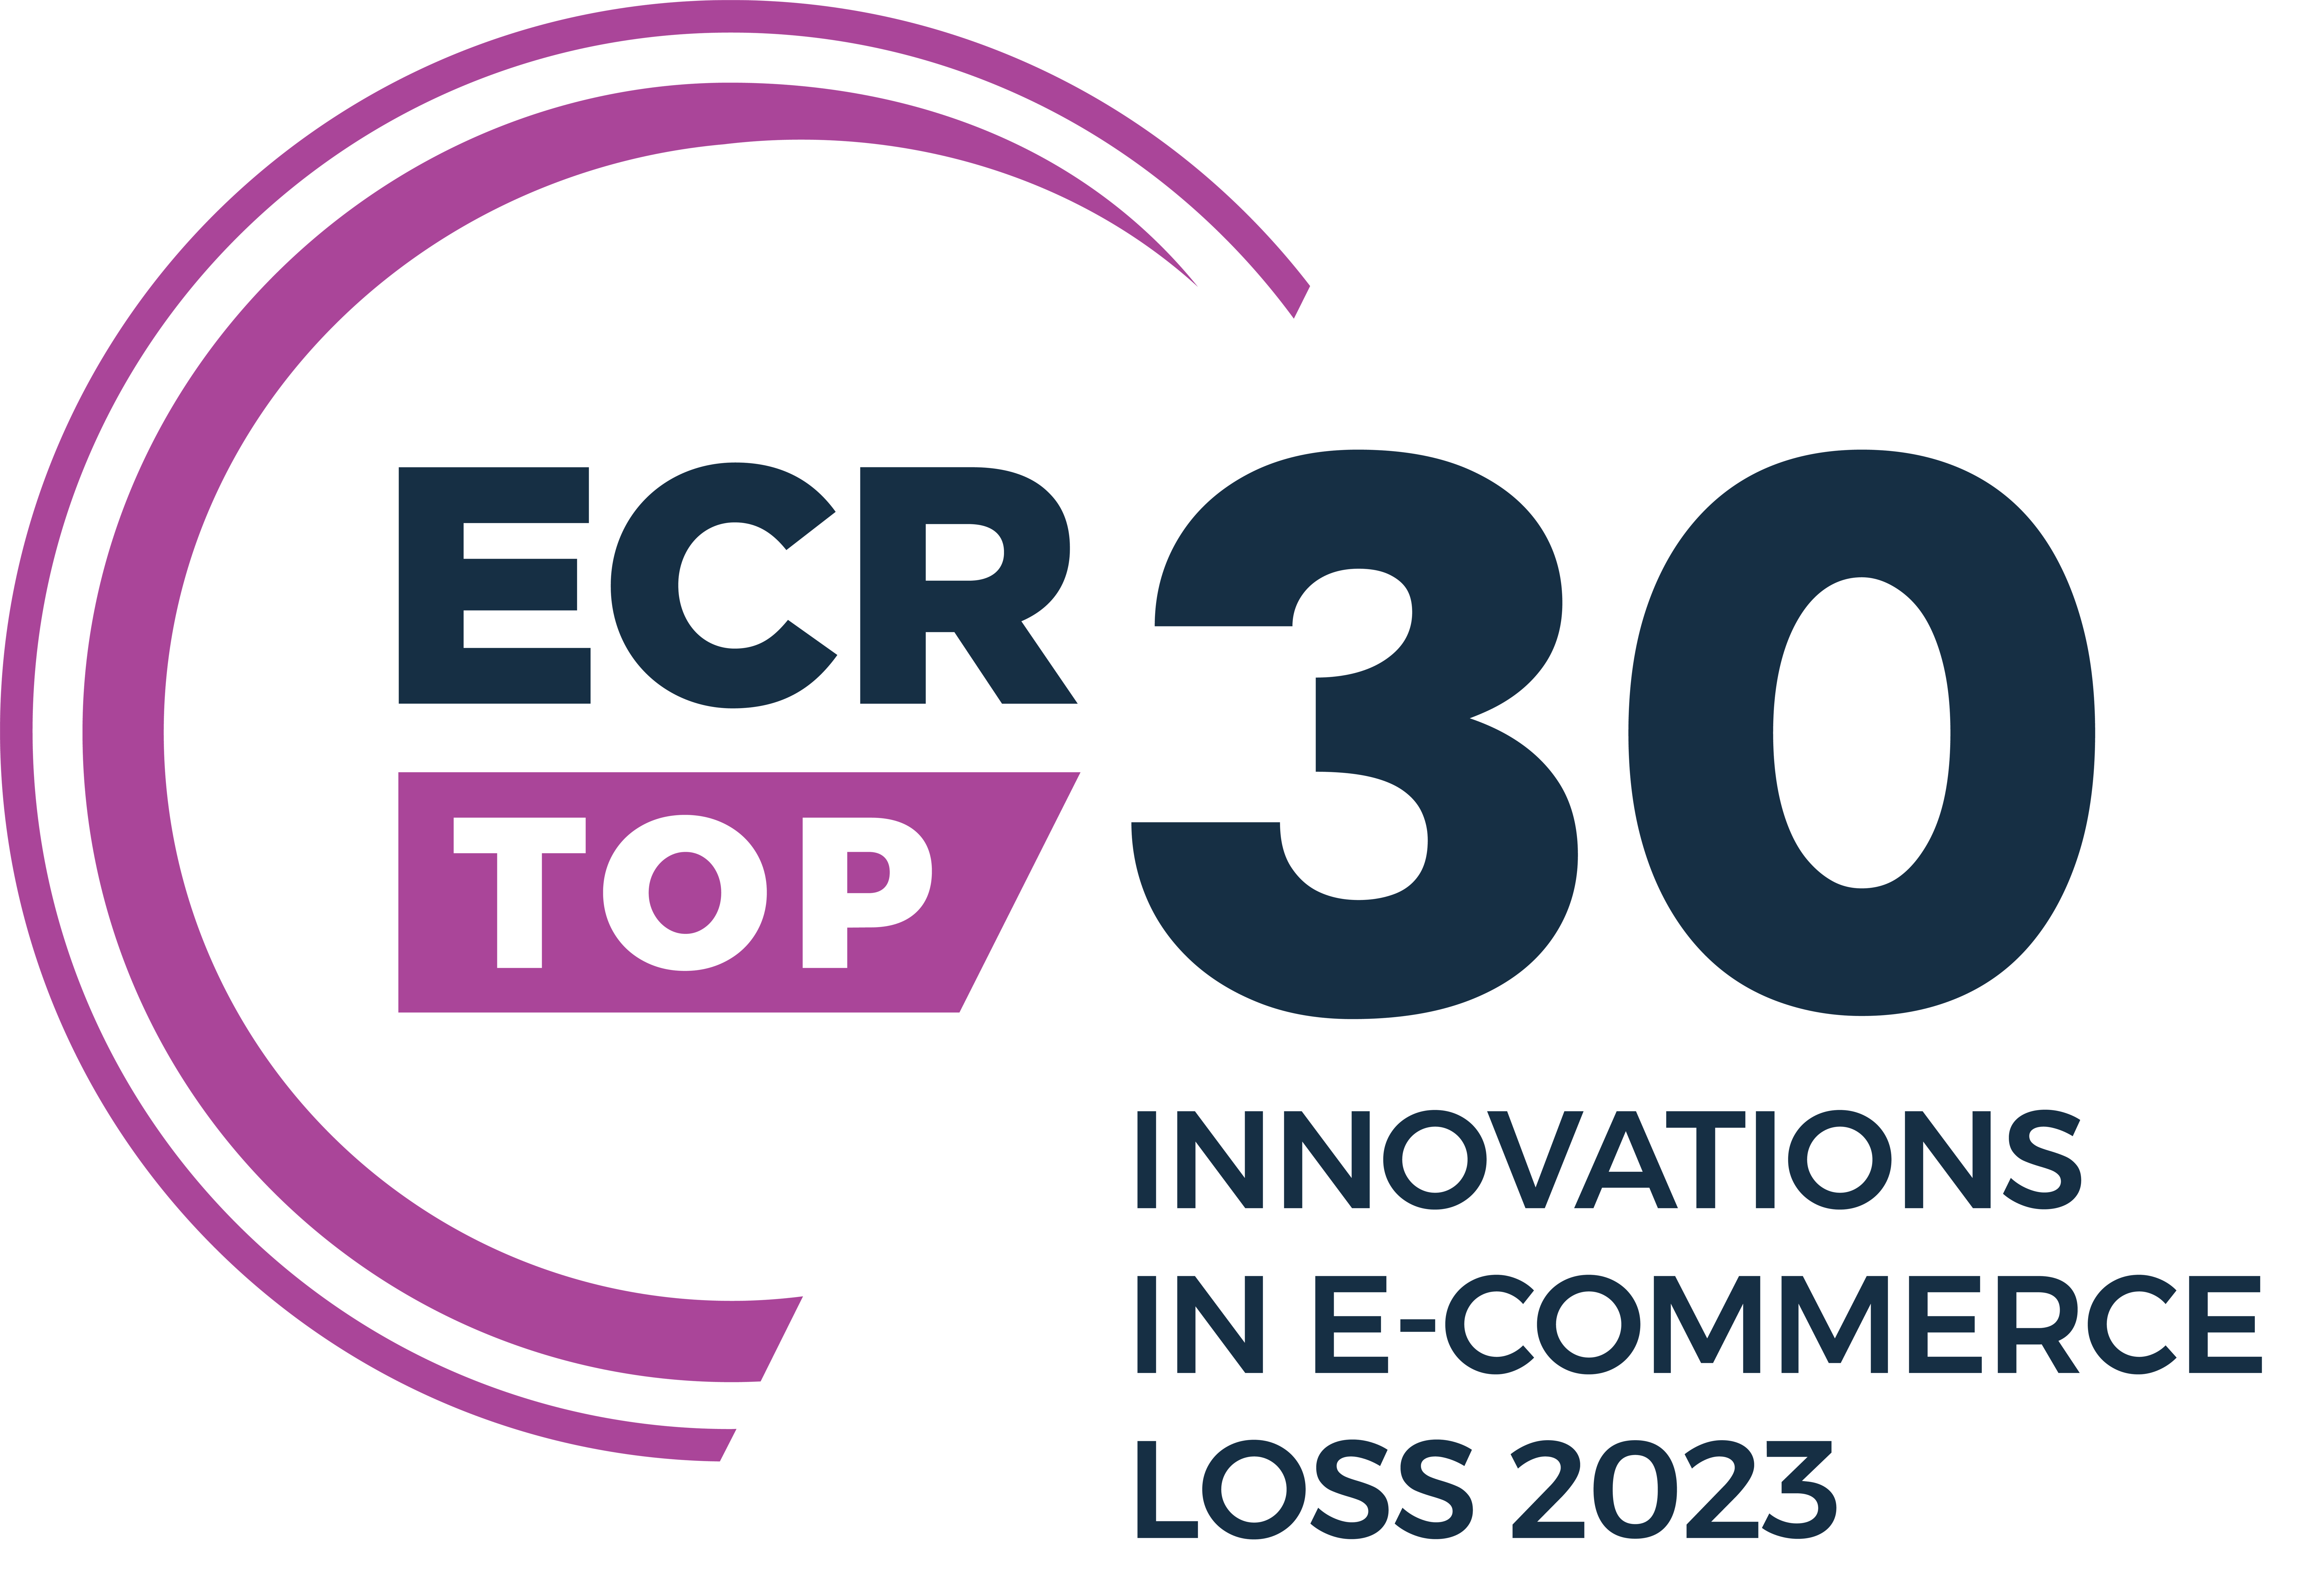 Announcing the Top 30 e-commerce loss innovations